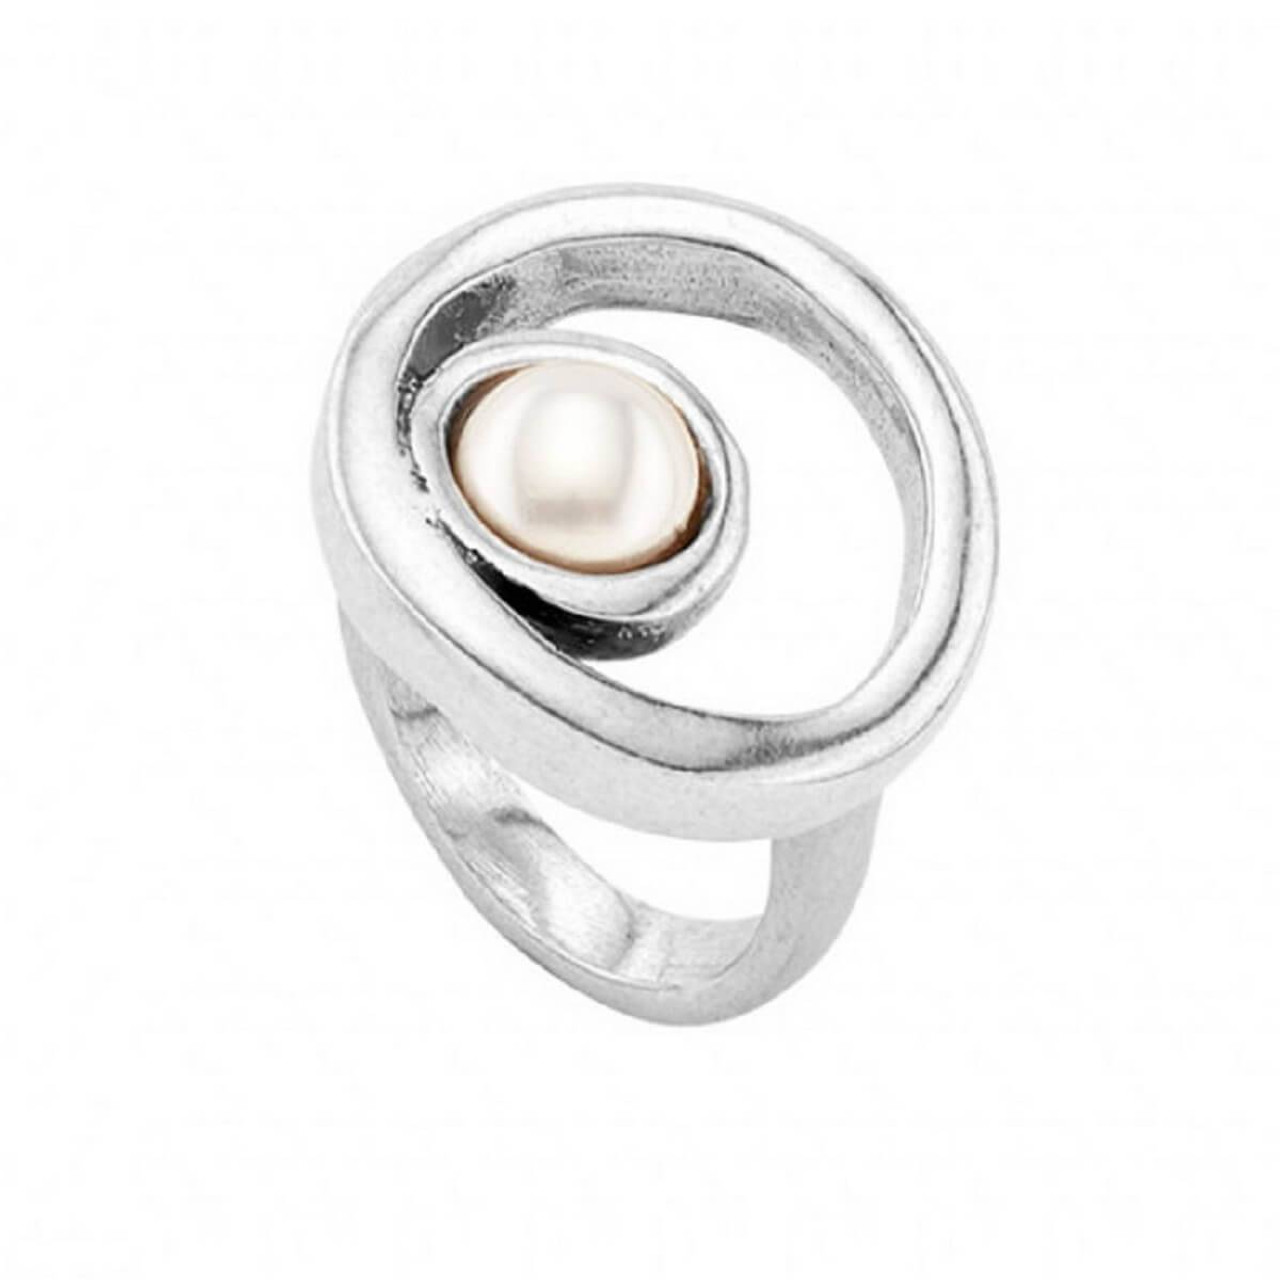 11.5mm Rare Cool-Toned Silver White Australian South Sea Pearl Ring, S925  Silver Luxe Flower Basket Setting with Sparkling CZ, Satin Lustre — Starlit  Pearls